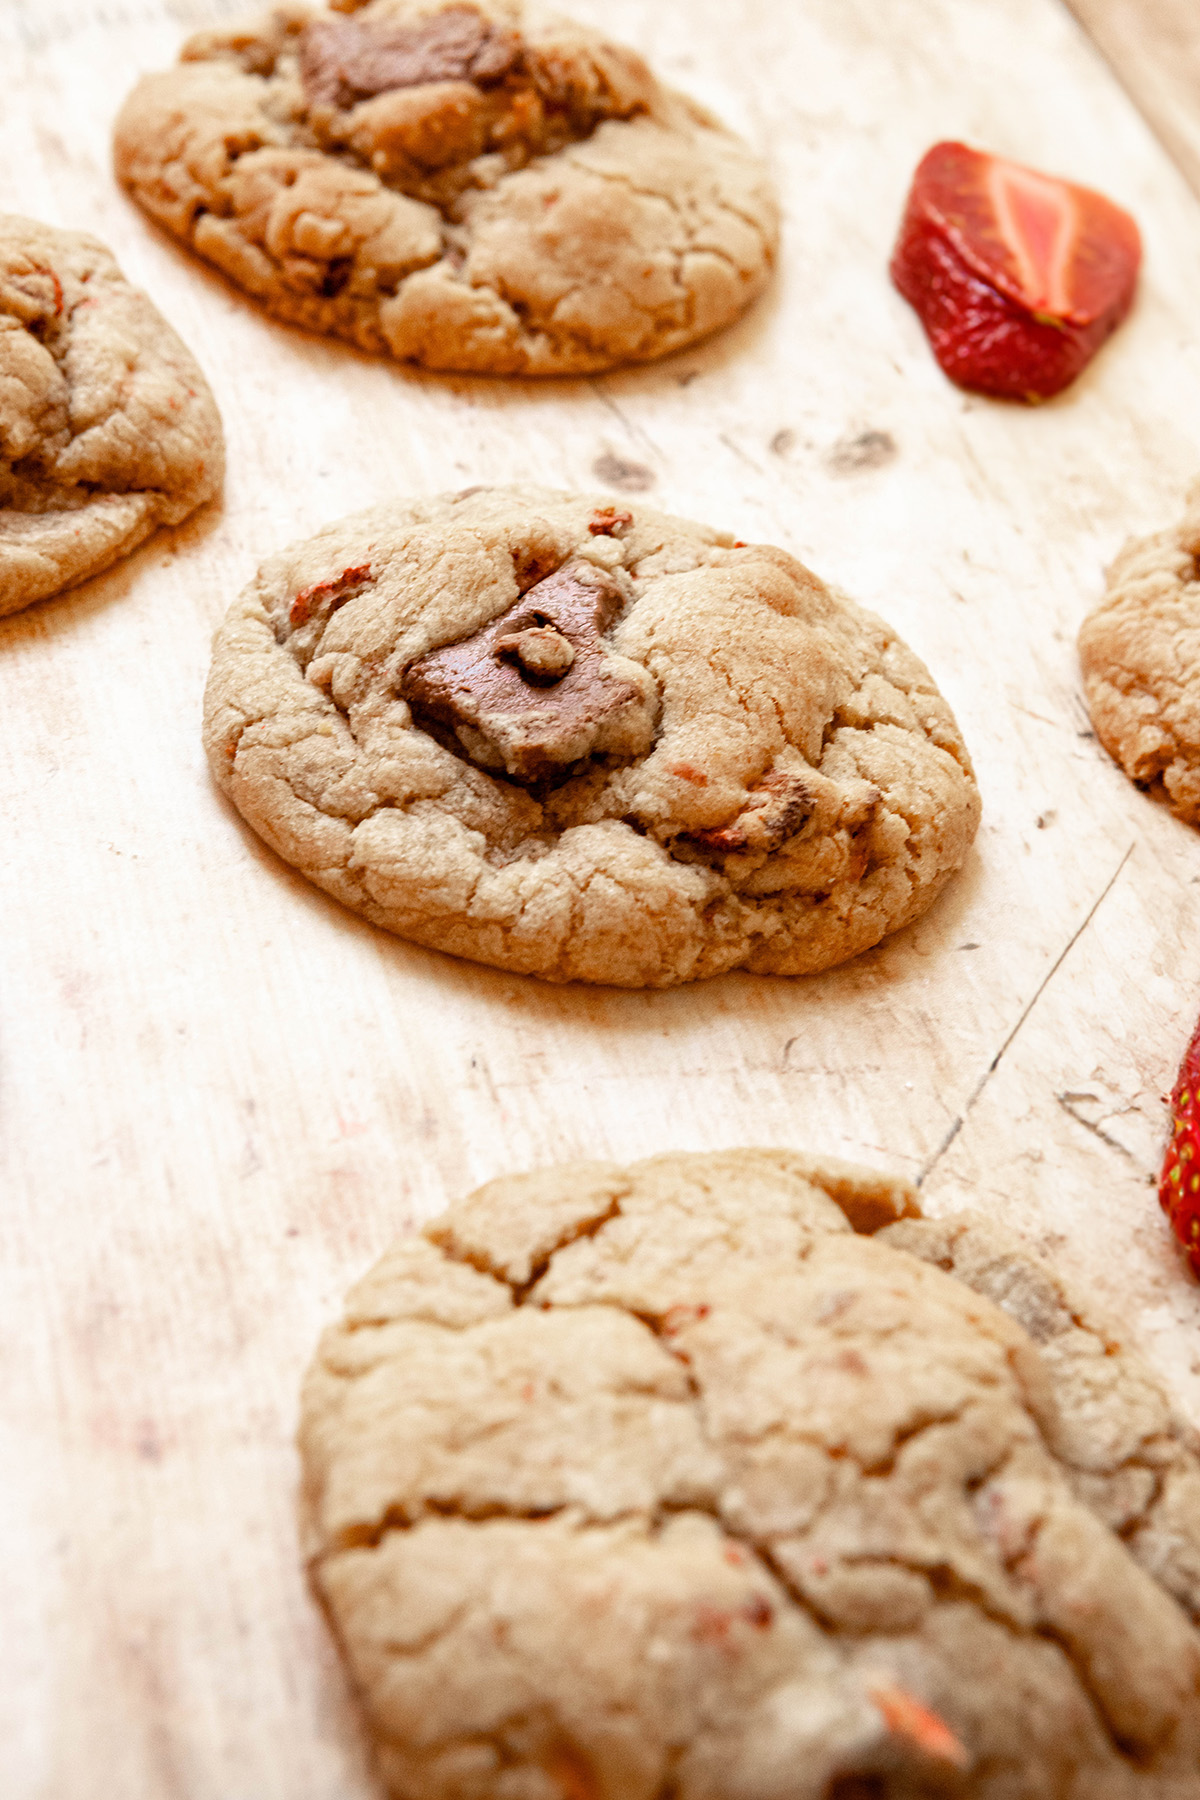 Miso Cookies With Brown Butter, Chocolate, & Strawberry